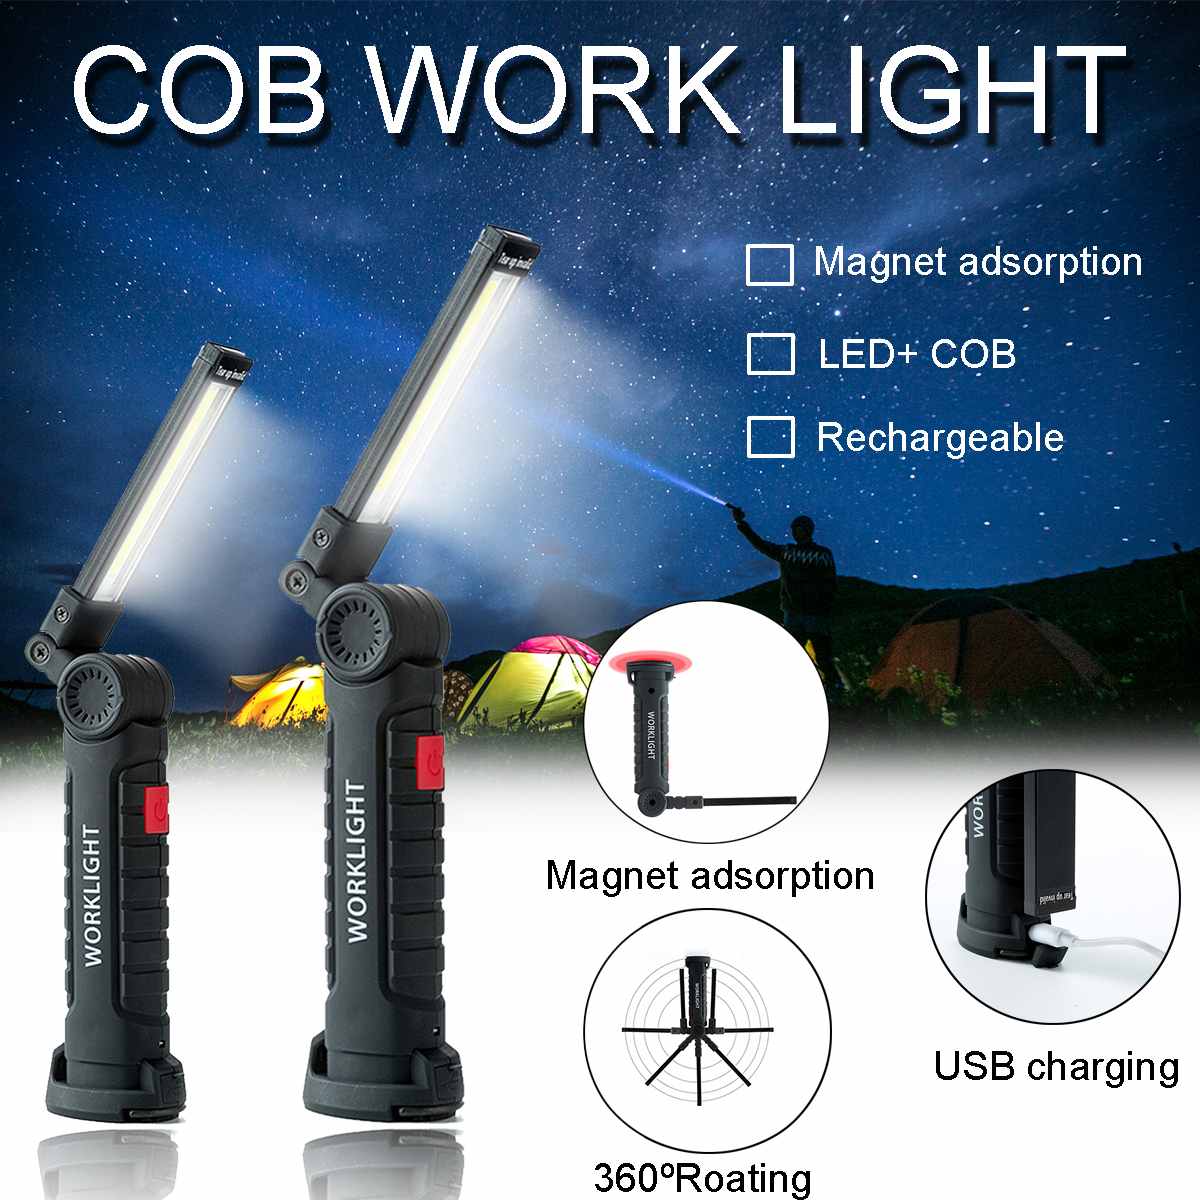 LED COB Rechargeable Work Light Magnetic Inspection Torch Flexible Cordless Lamp 